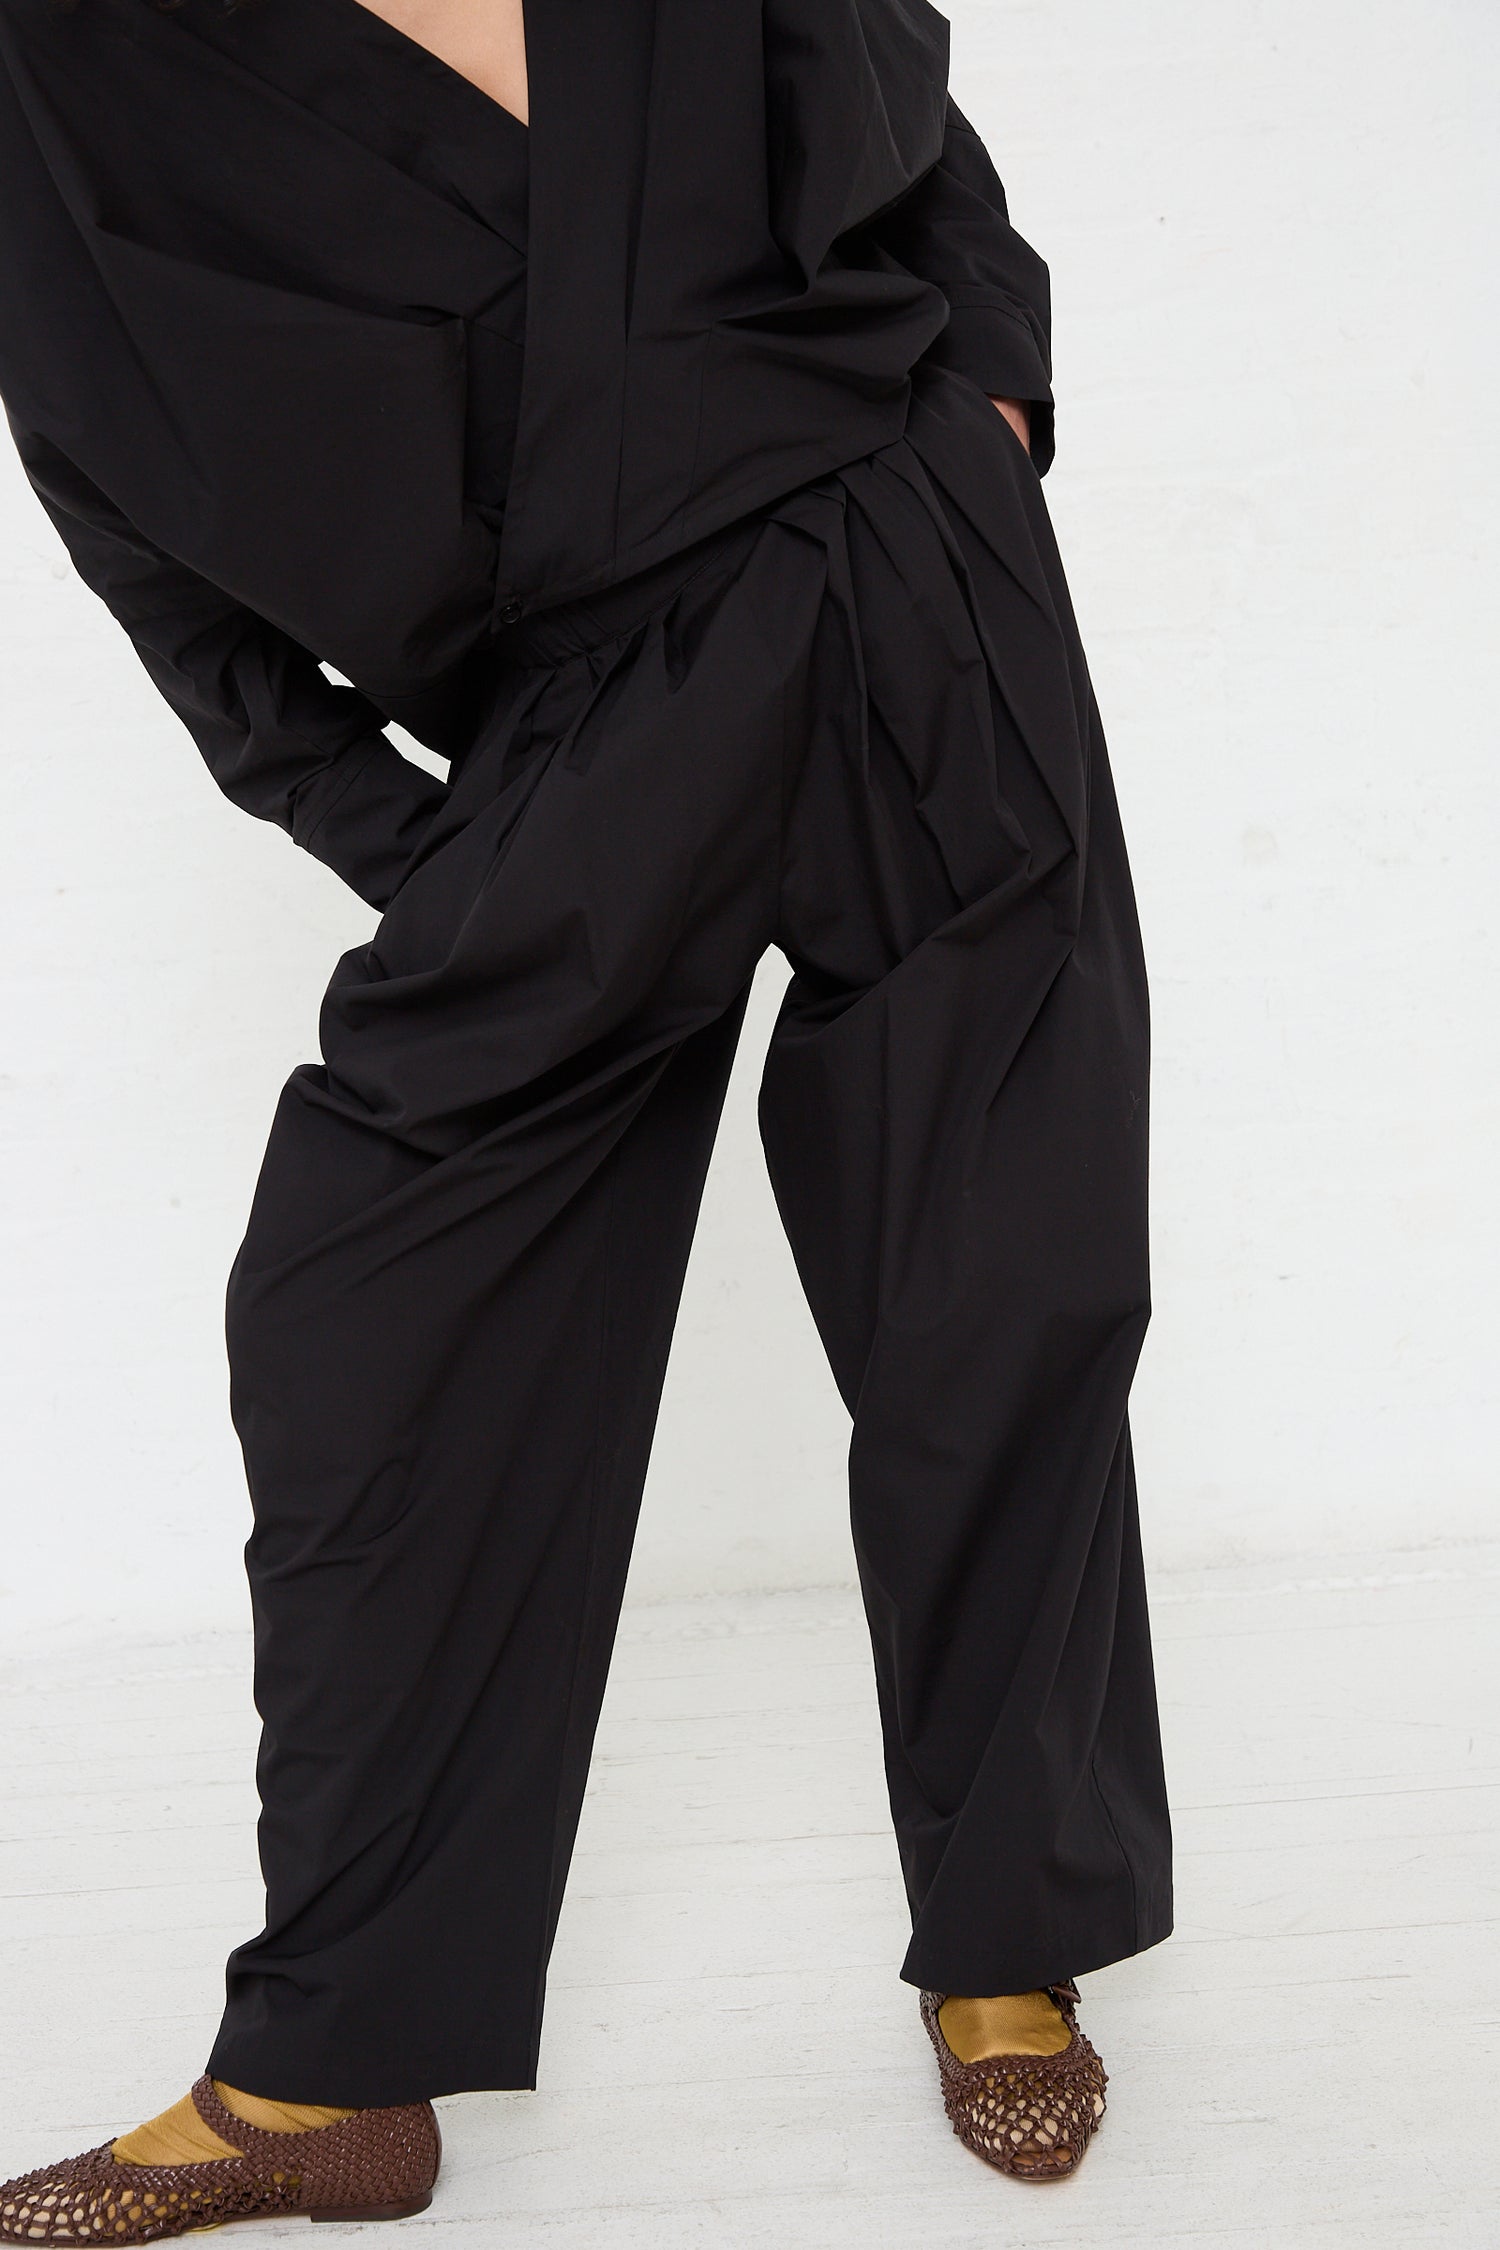 A person wearing Black Crane's Organic Cotton Straight Draped Pant in Black and a matching jacket, paired with brown patterned shoes.